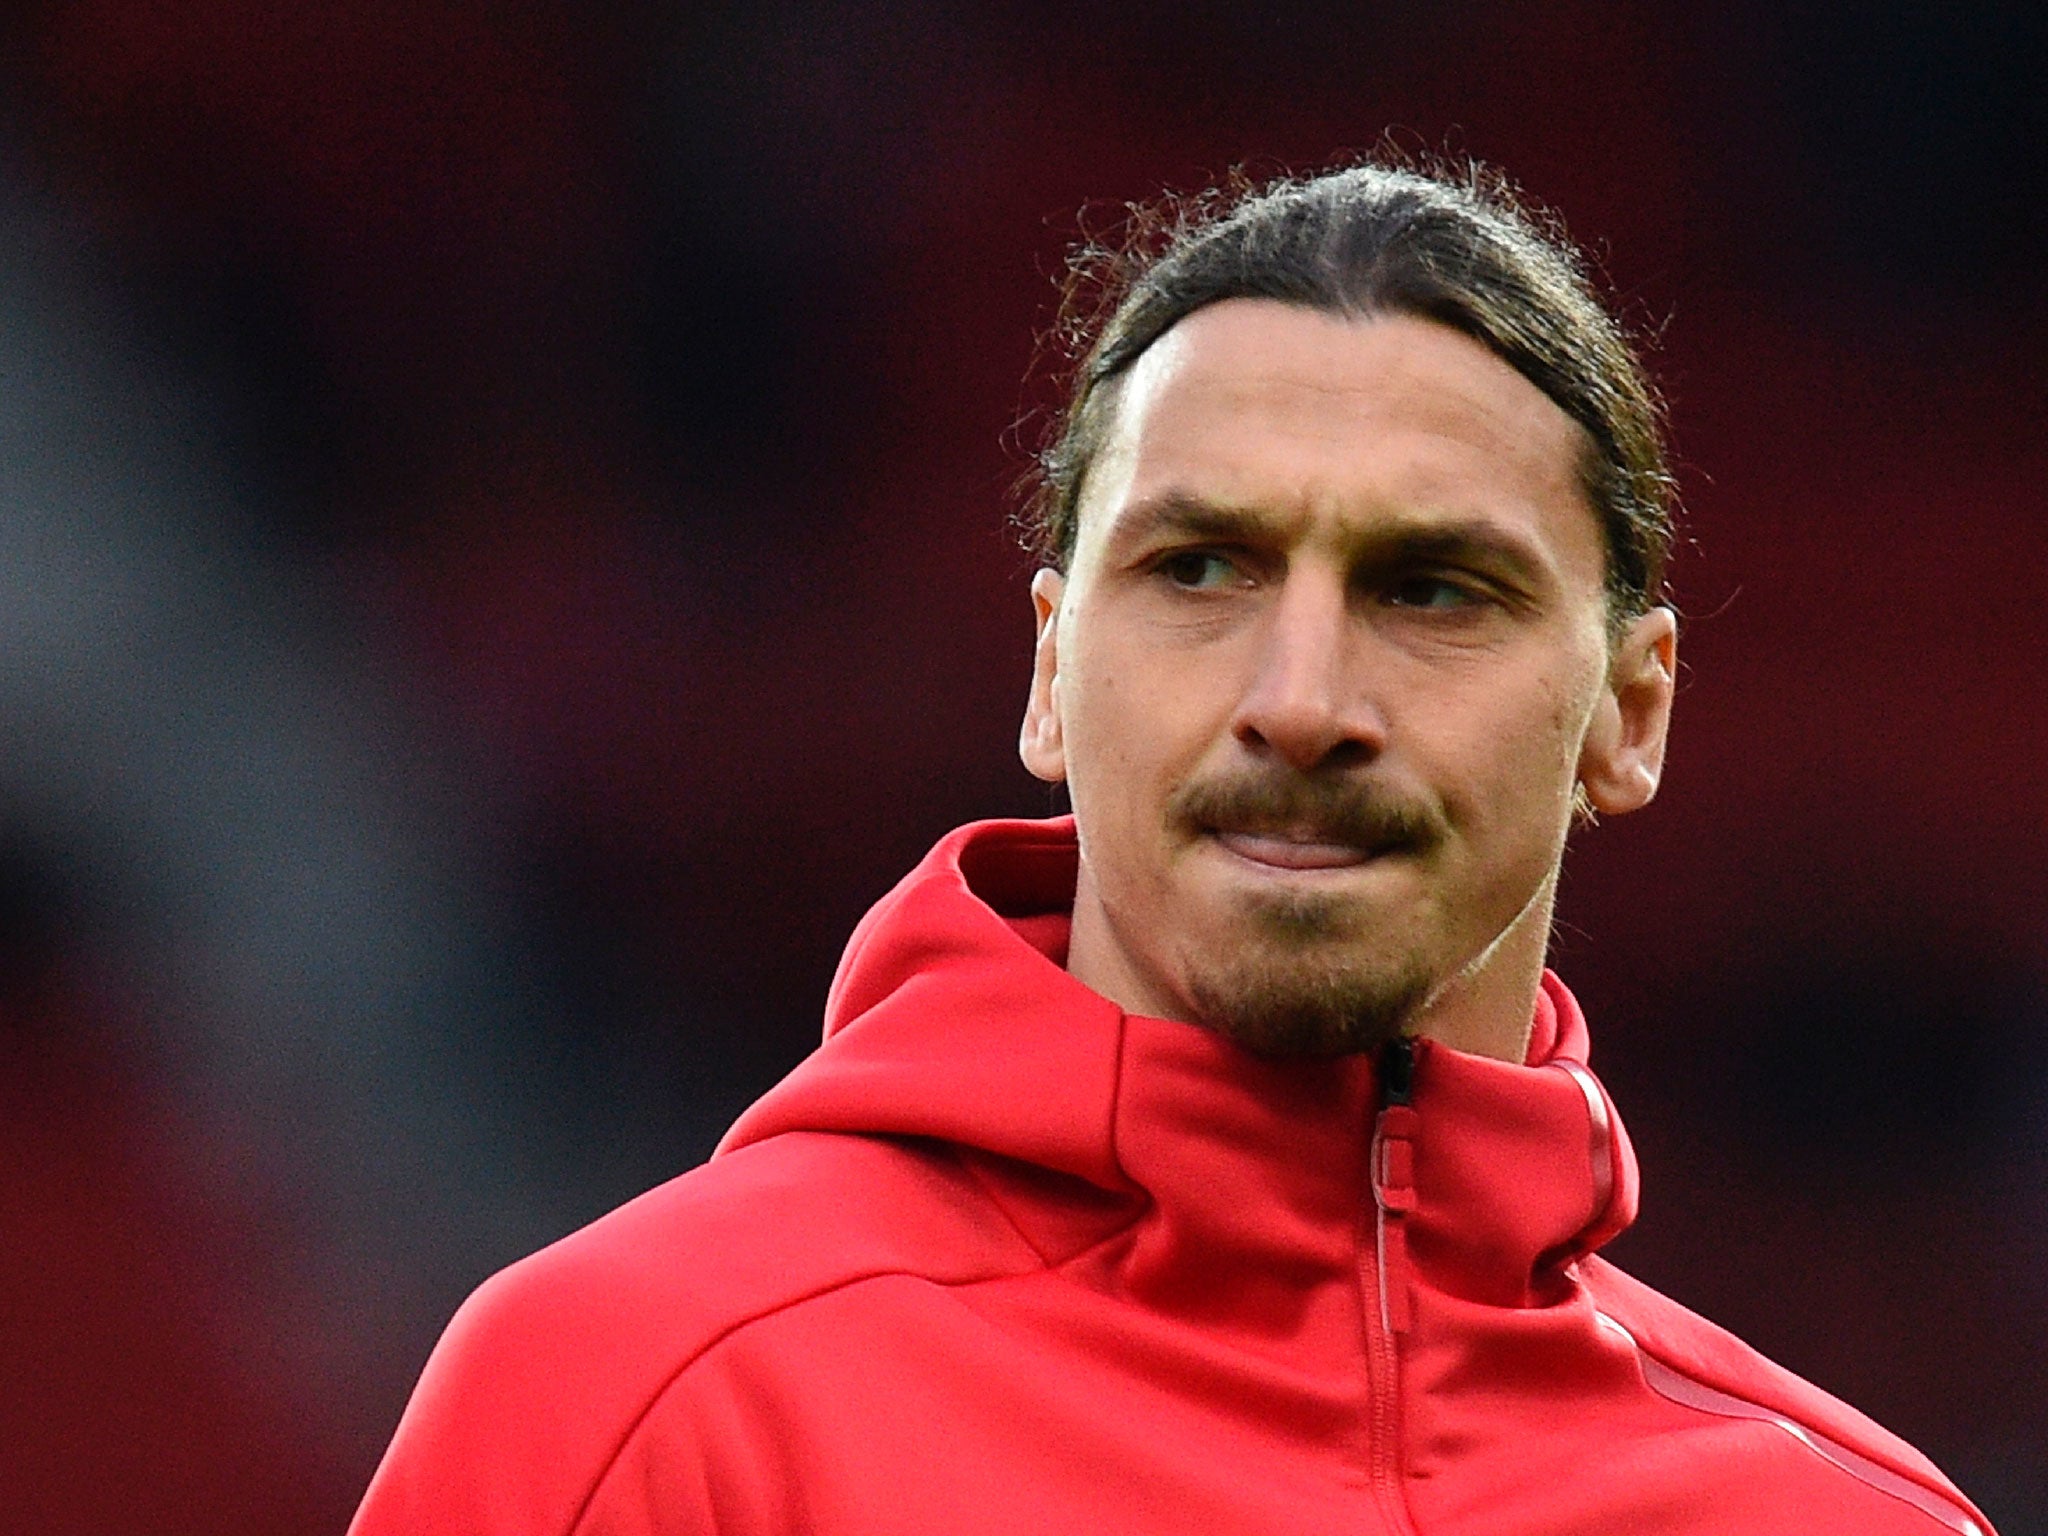 Raiola confirmed Ibrahimovic would speak to United first to see what they want